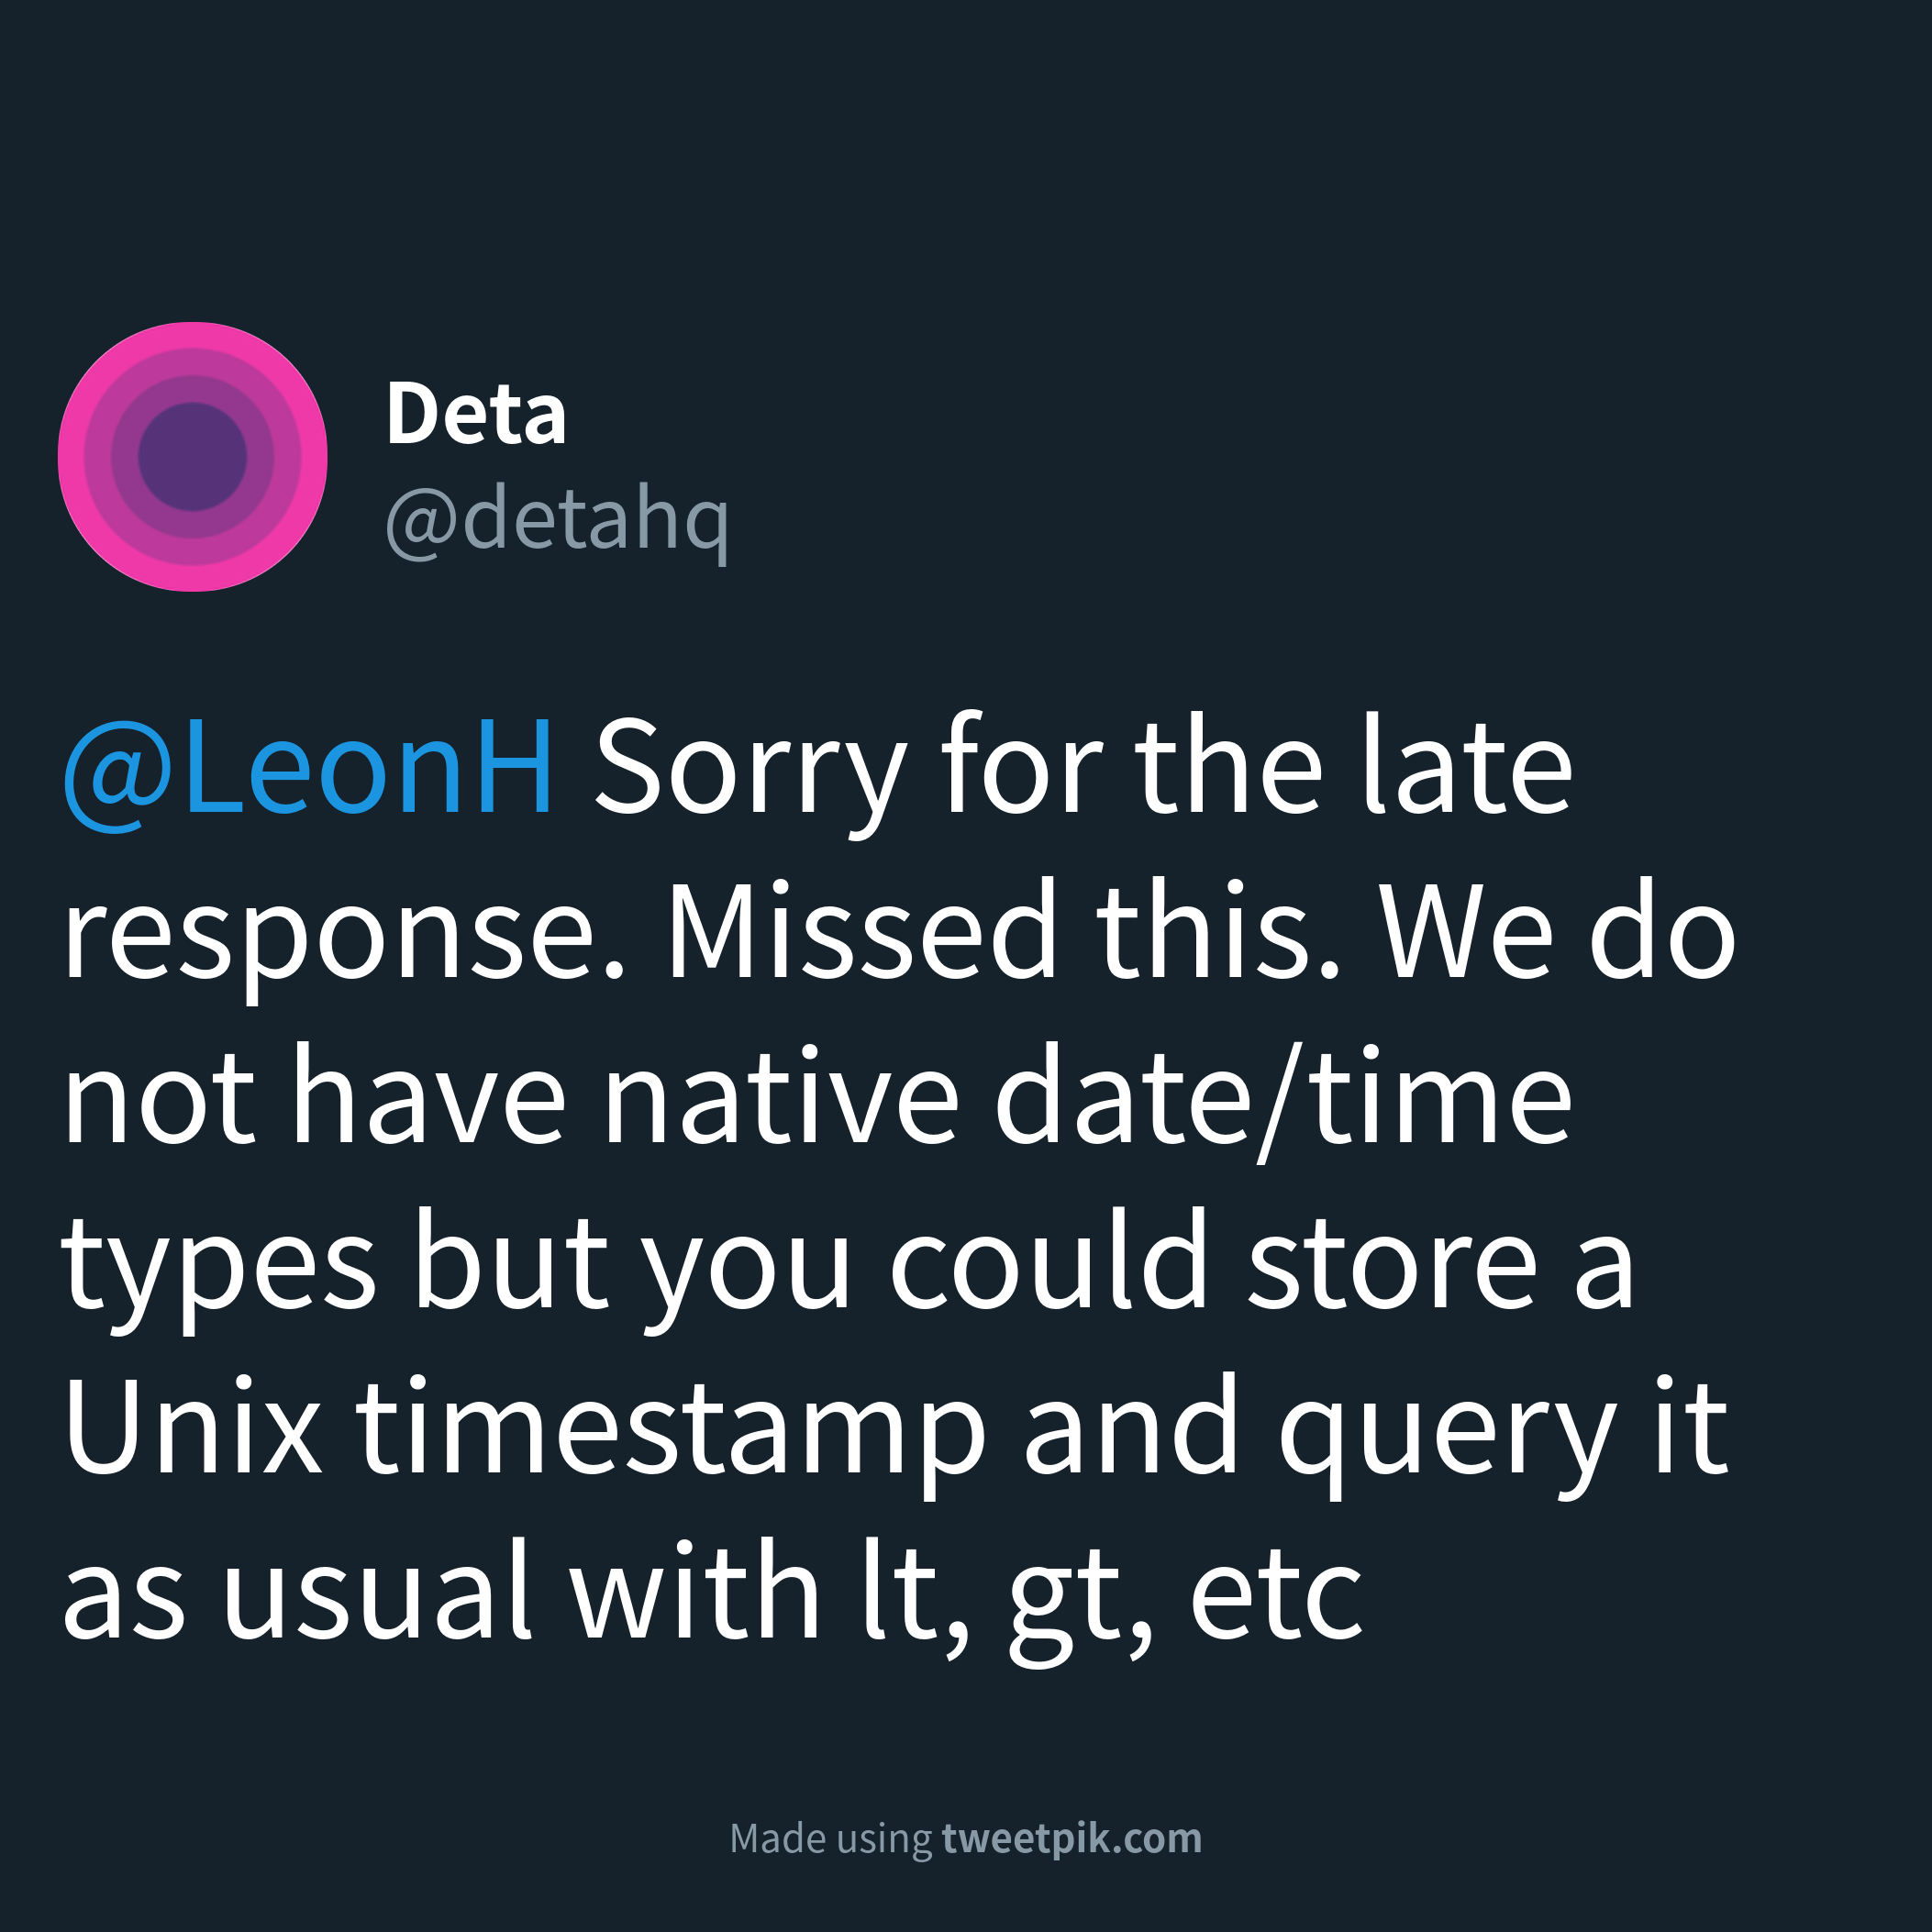 Deta do not have native date / time types.